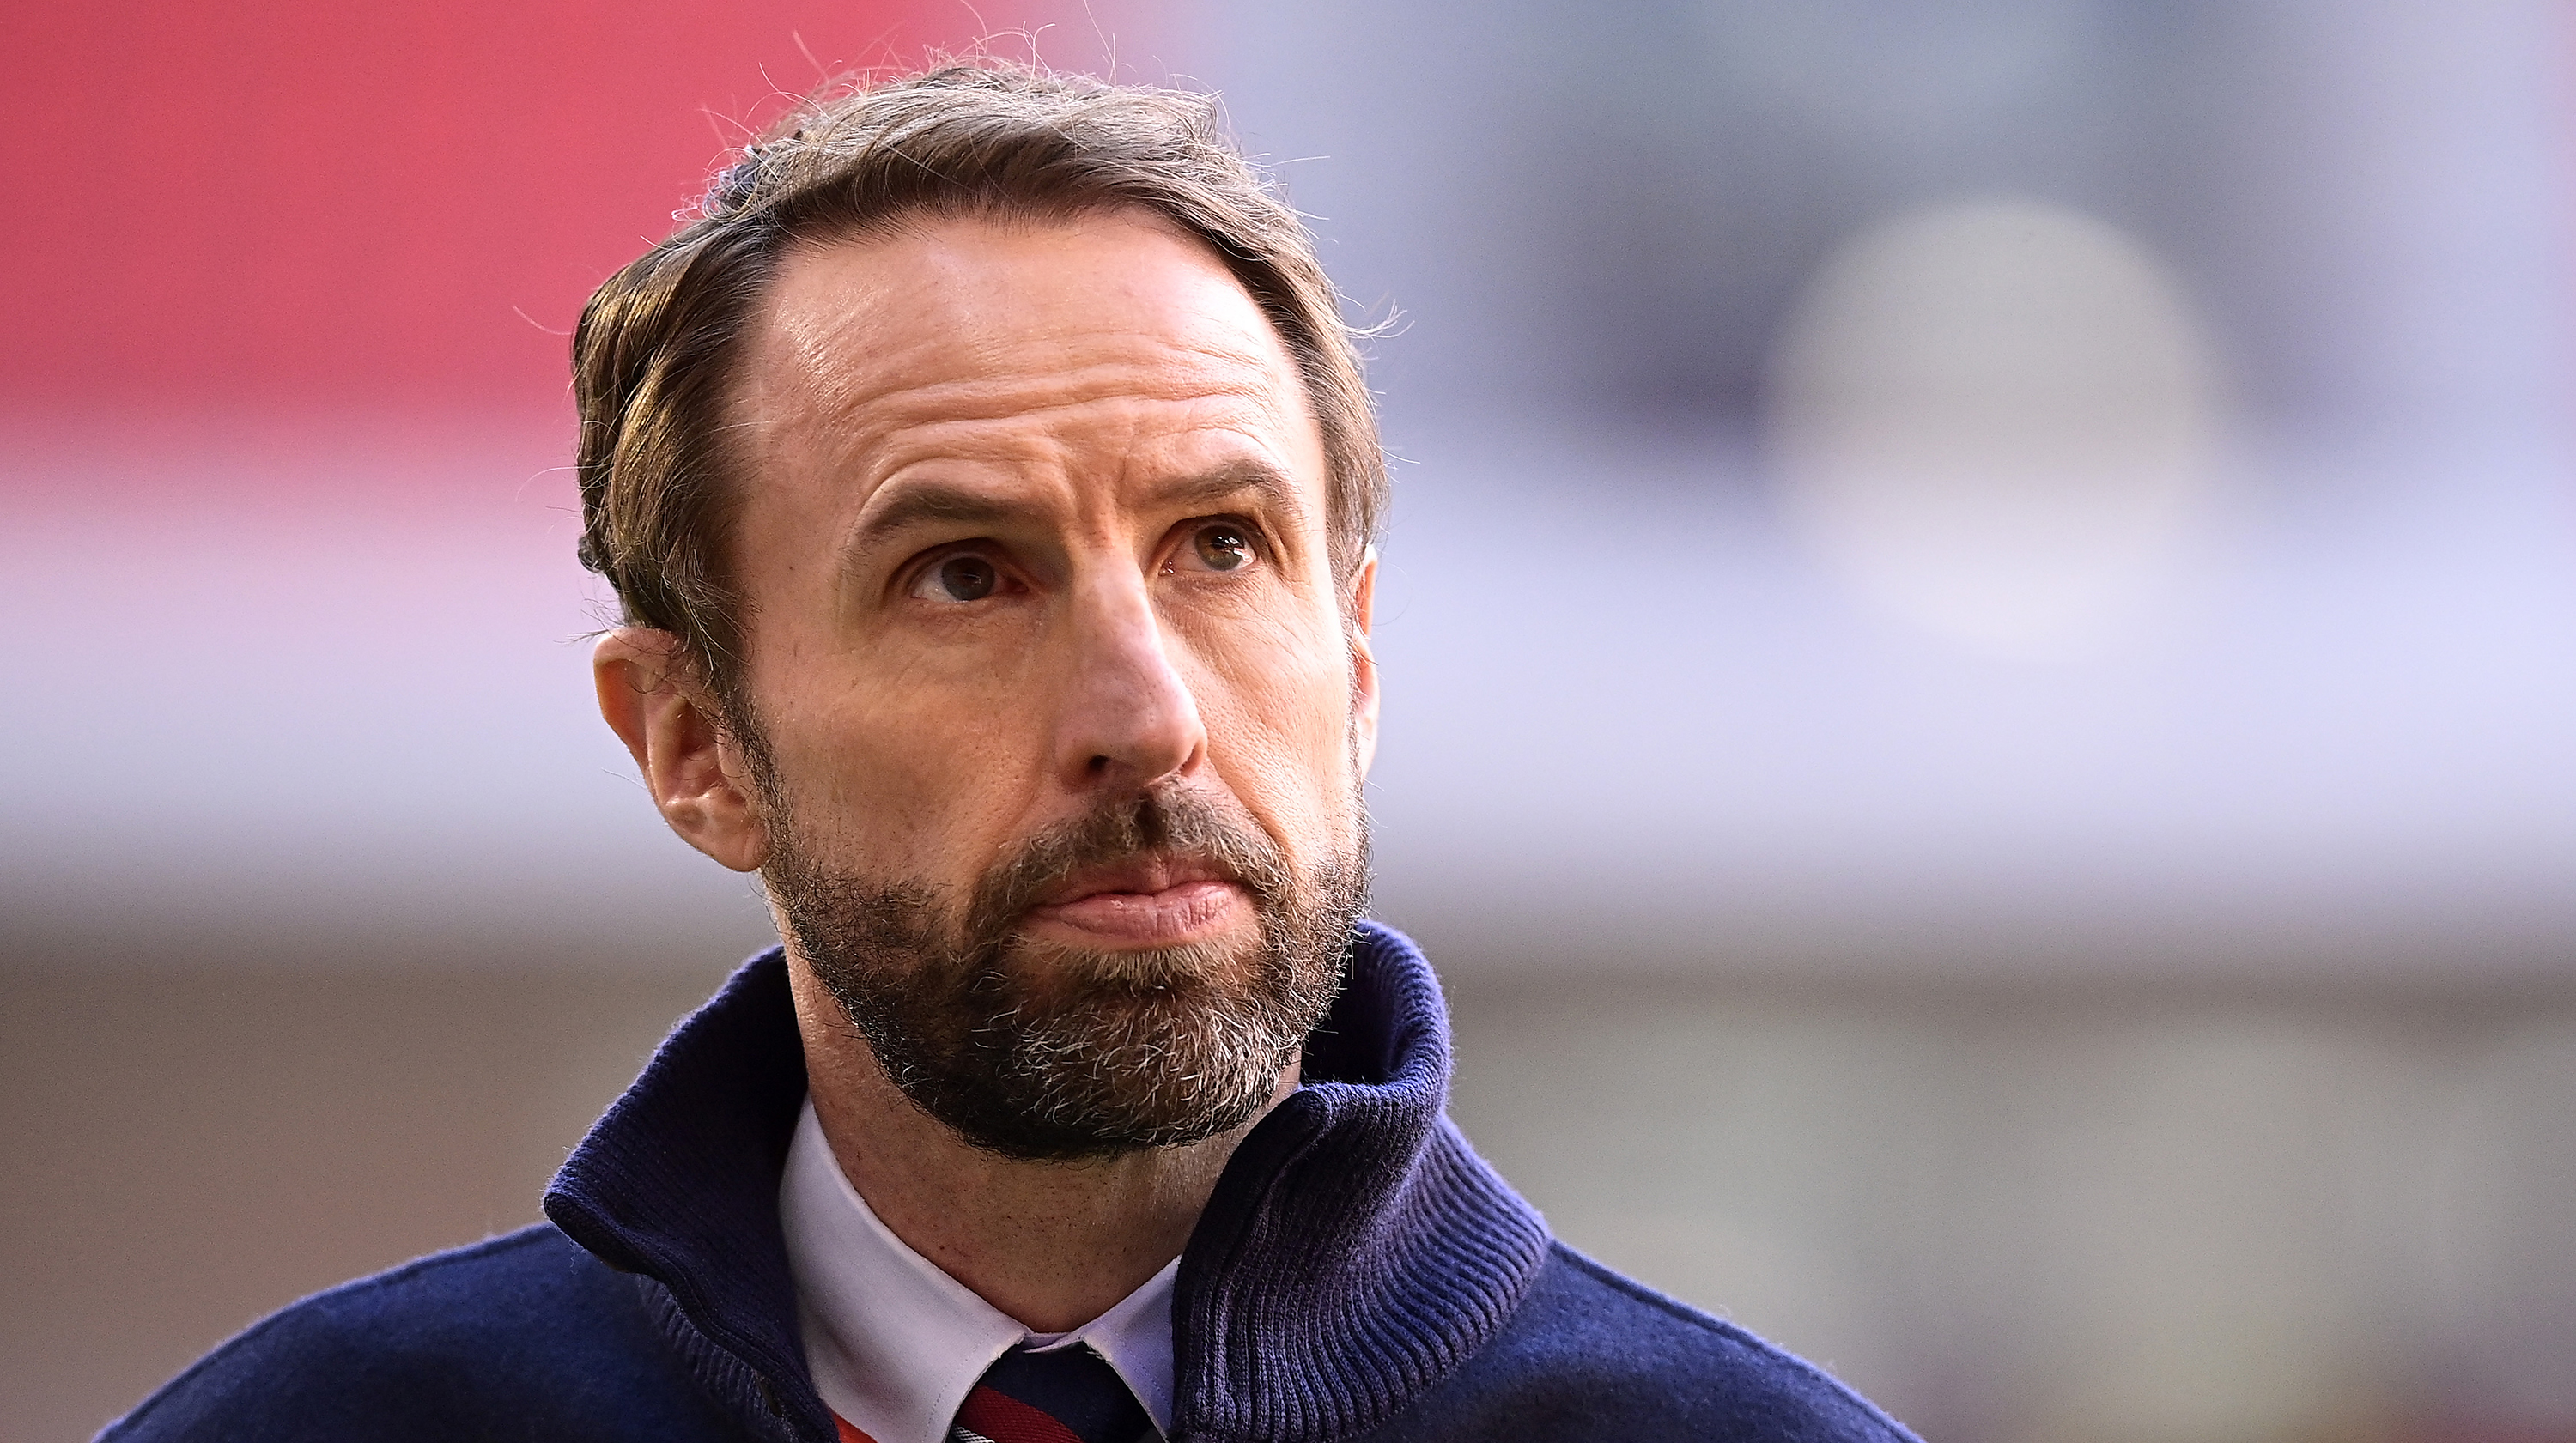 Gareth Southgate, Manager of England looks on prior to the FIFA World Cup 2022 Qatar qualifying match between Albania and England at the Qemal Stafa Stadium on March 28, 2021 in Tirana, Albania.